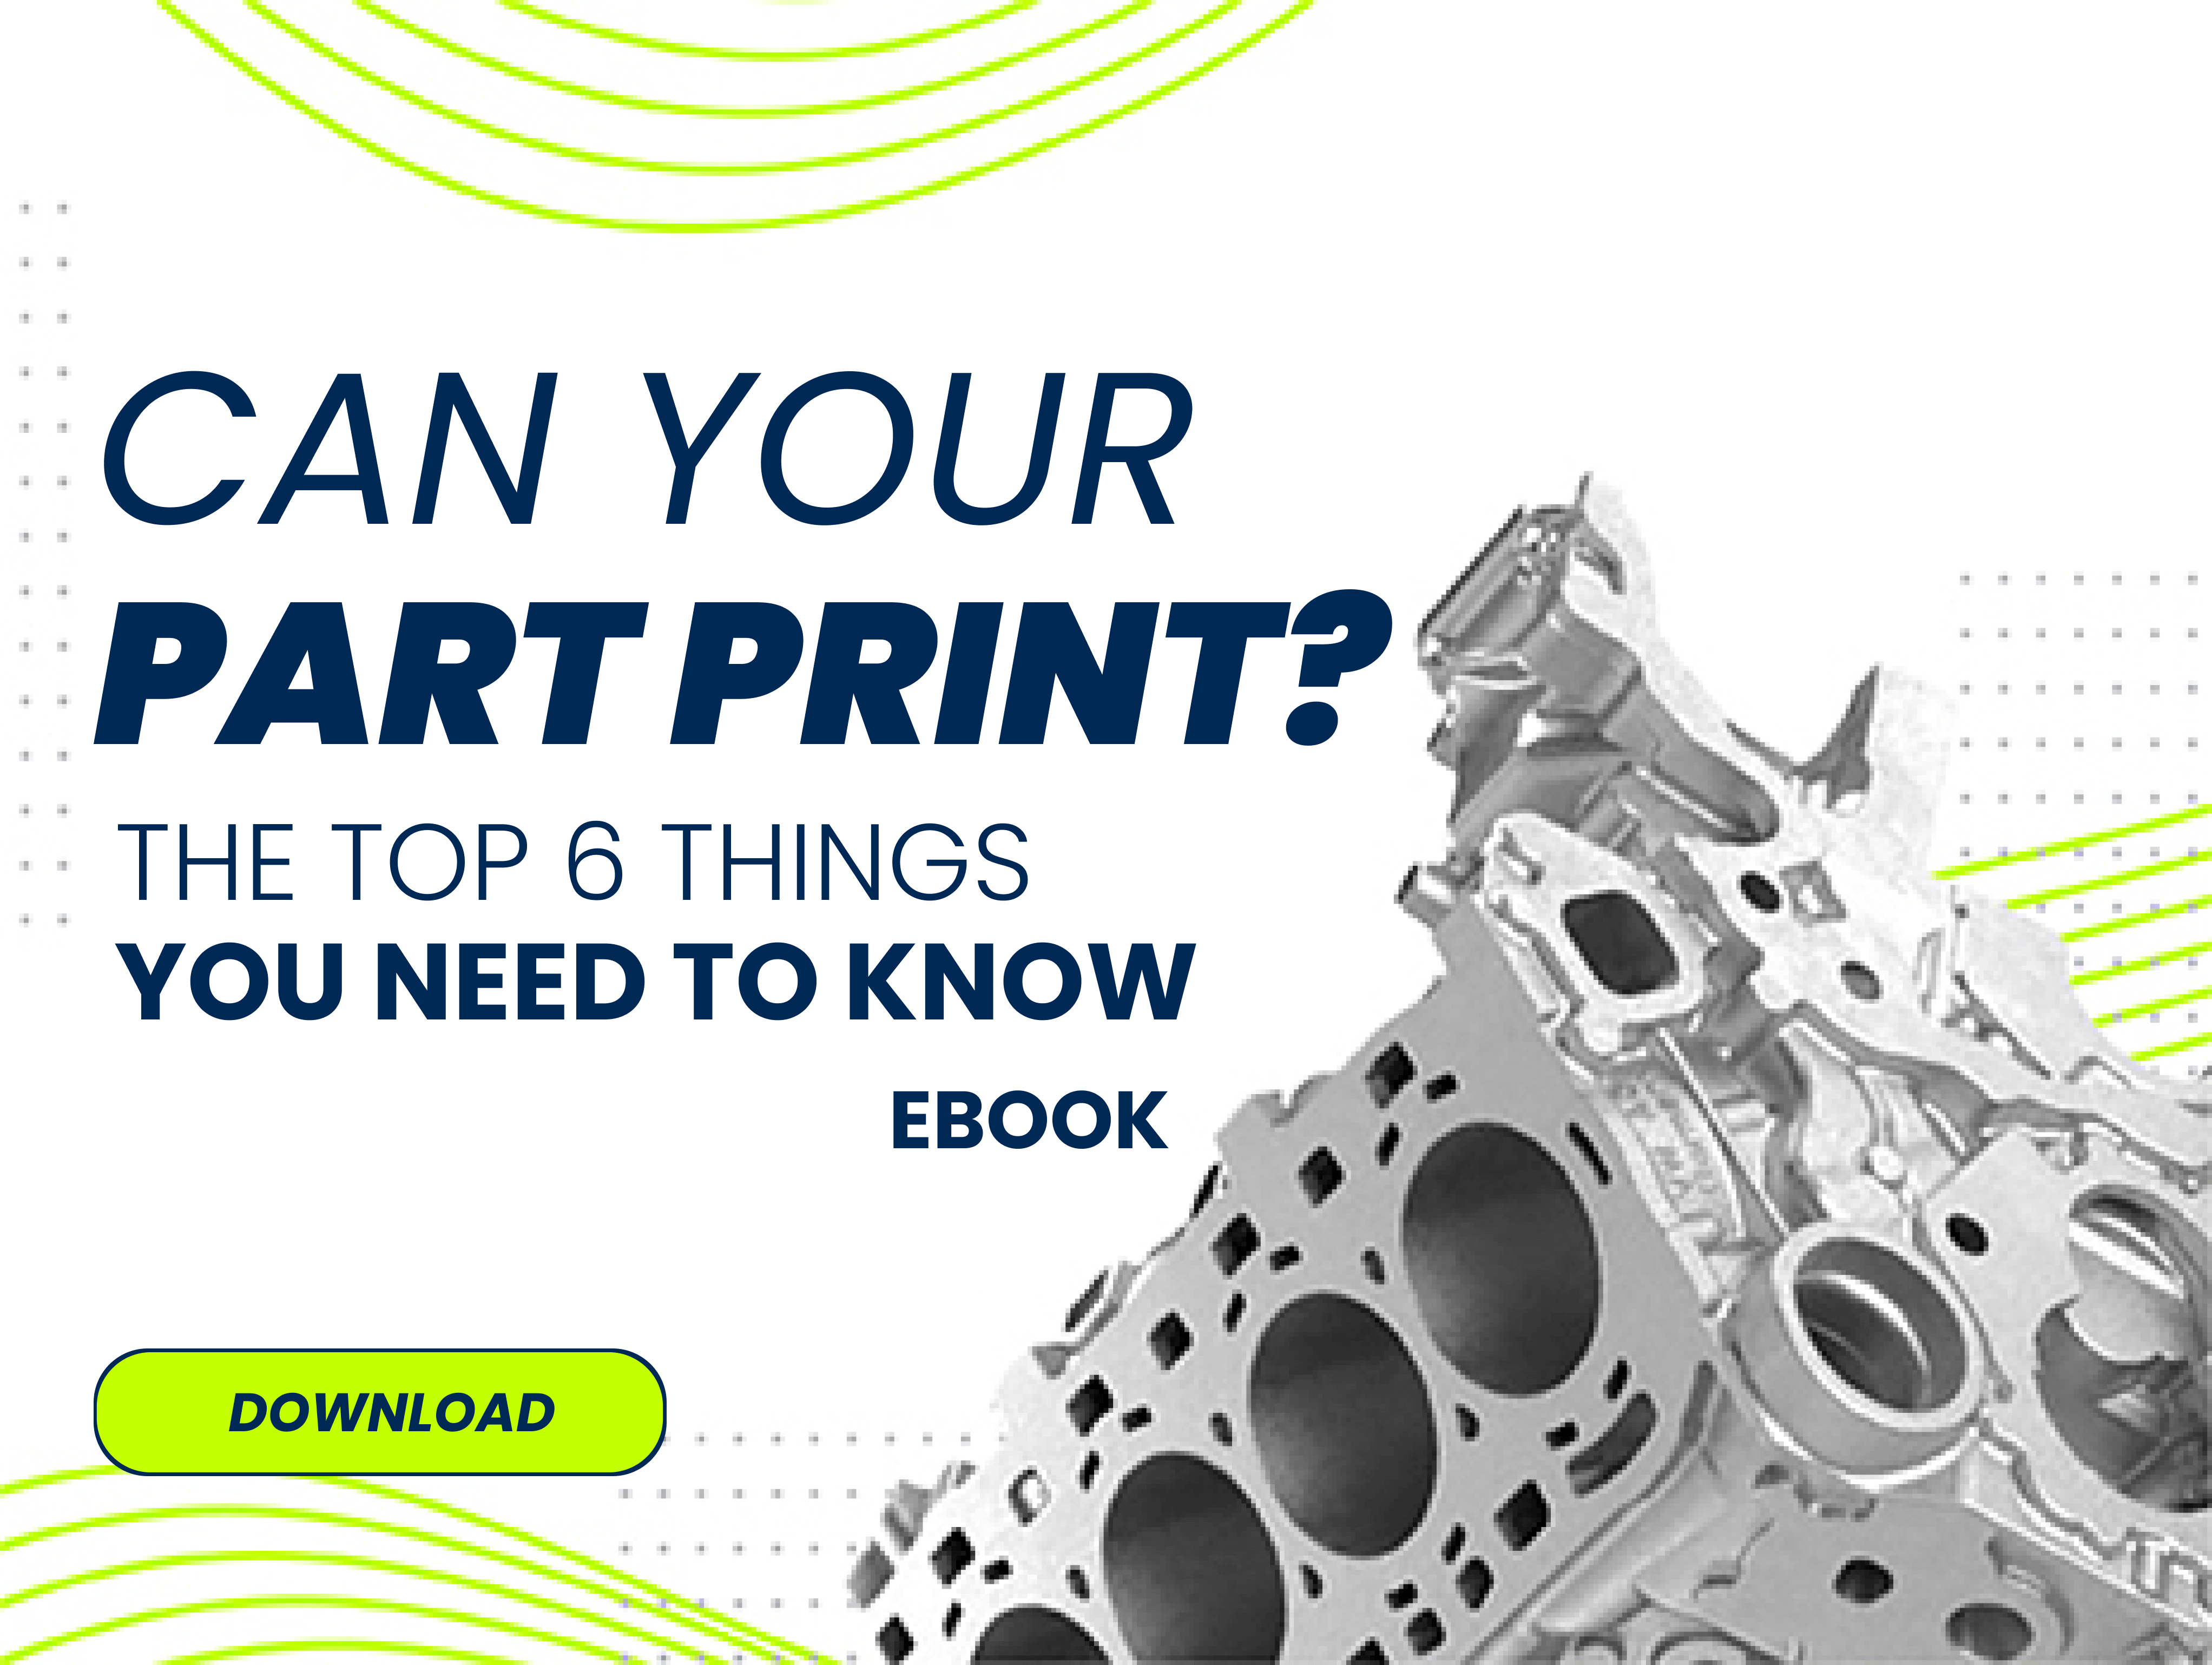 Can Your Part Print - Top 6 Things